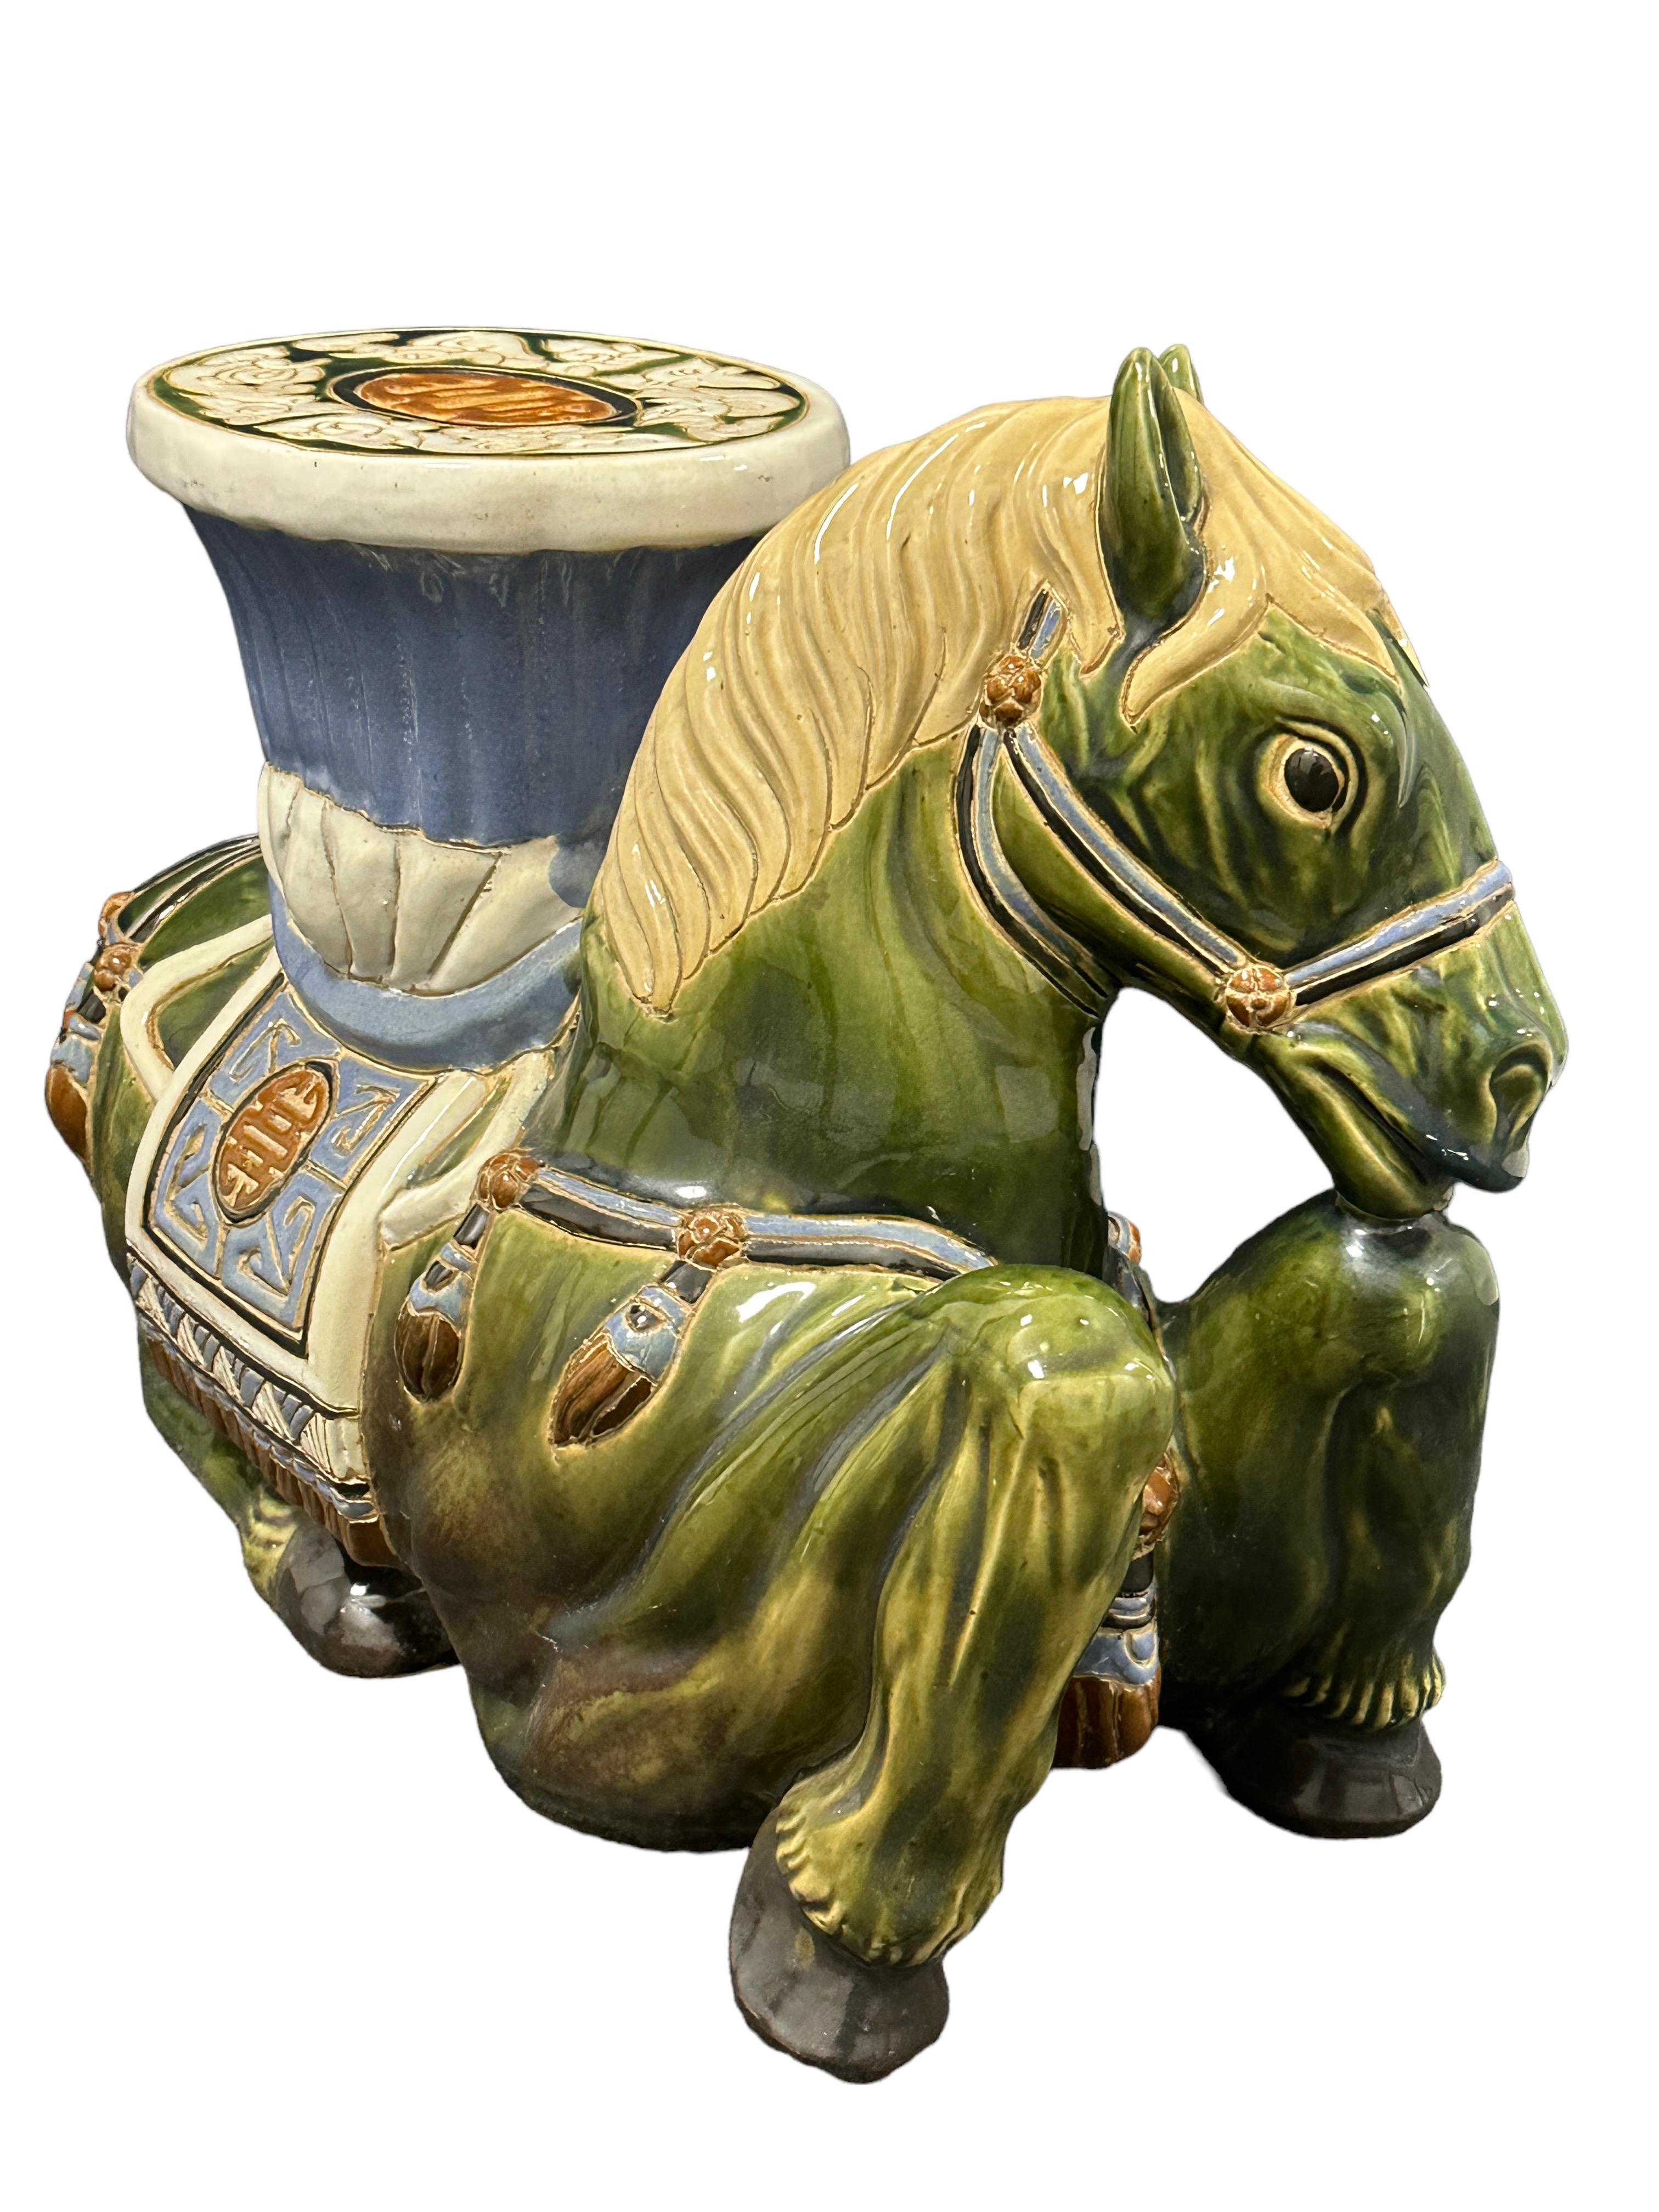 Mid-20th century glazed ceramic or terracotta garden stool plant stand or seat, flower pot seat or side table. Handmade. Vintage garden seat in the shape of an Horse with a pedestal top, all in  jade green color with blue, cream white and brown